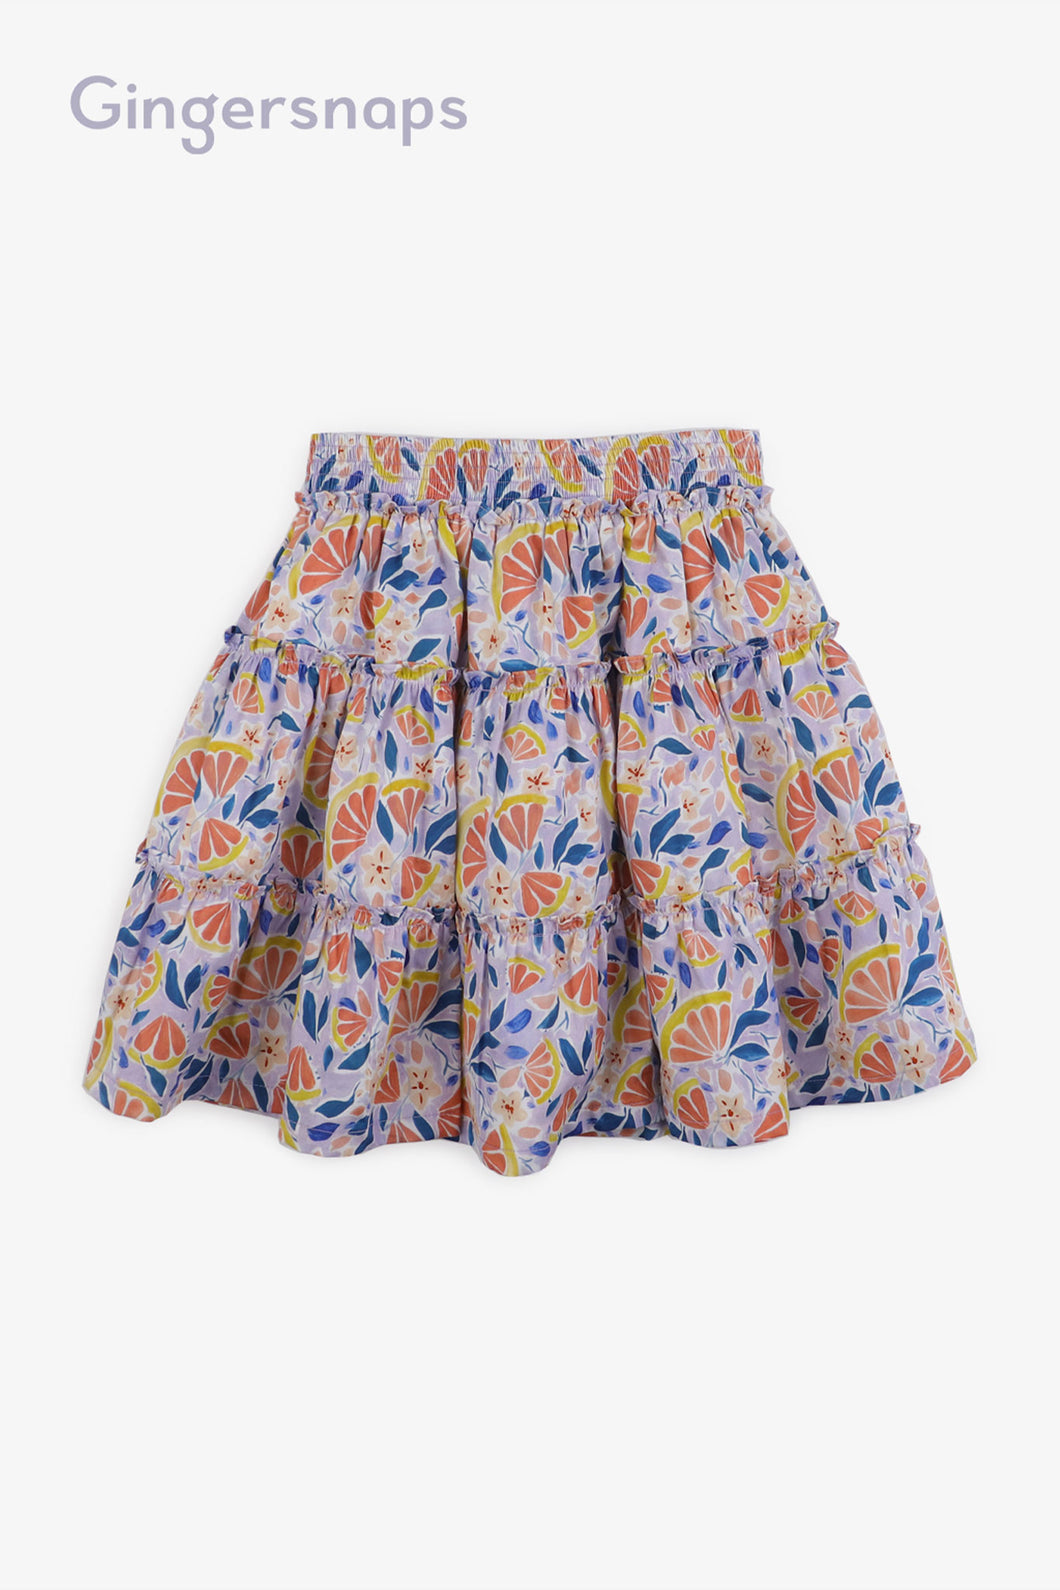 Gingersnaps Printed Tiered Skirt